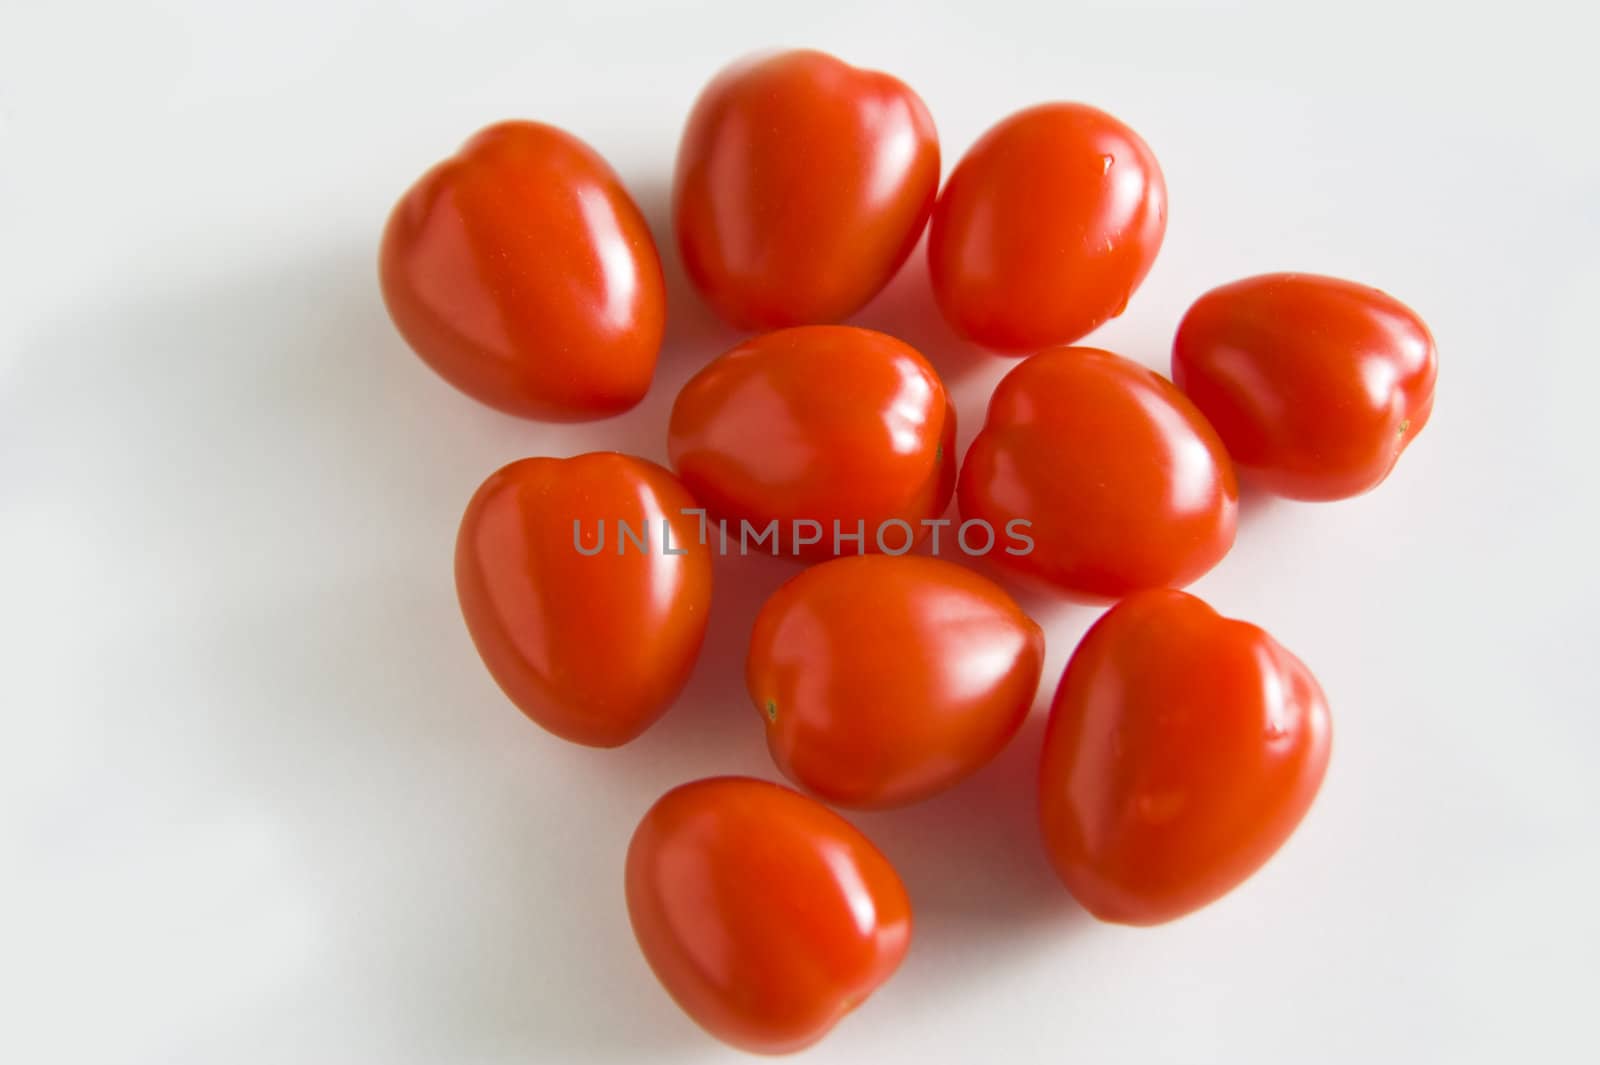 Ten ripe tomatoes on a white background